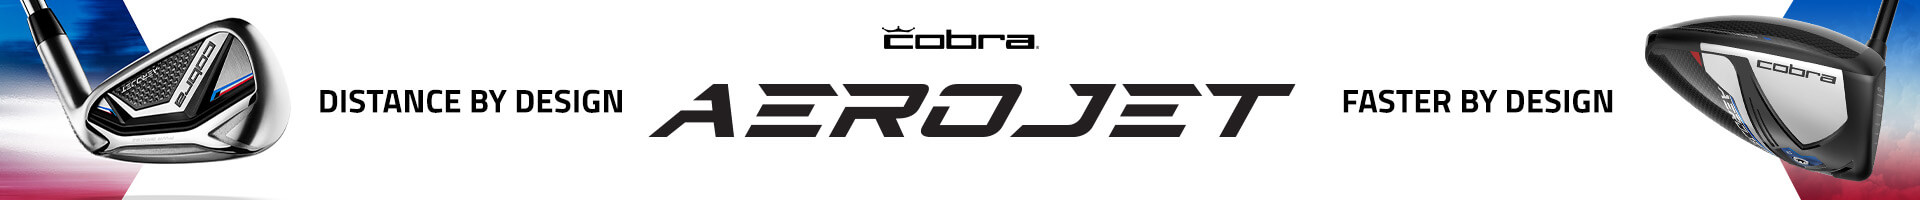 New Cobra AeroJet Clubs Available 2/10/23